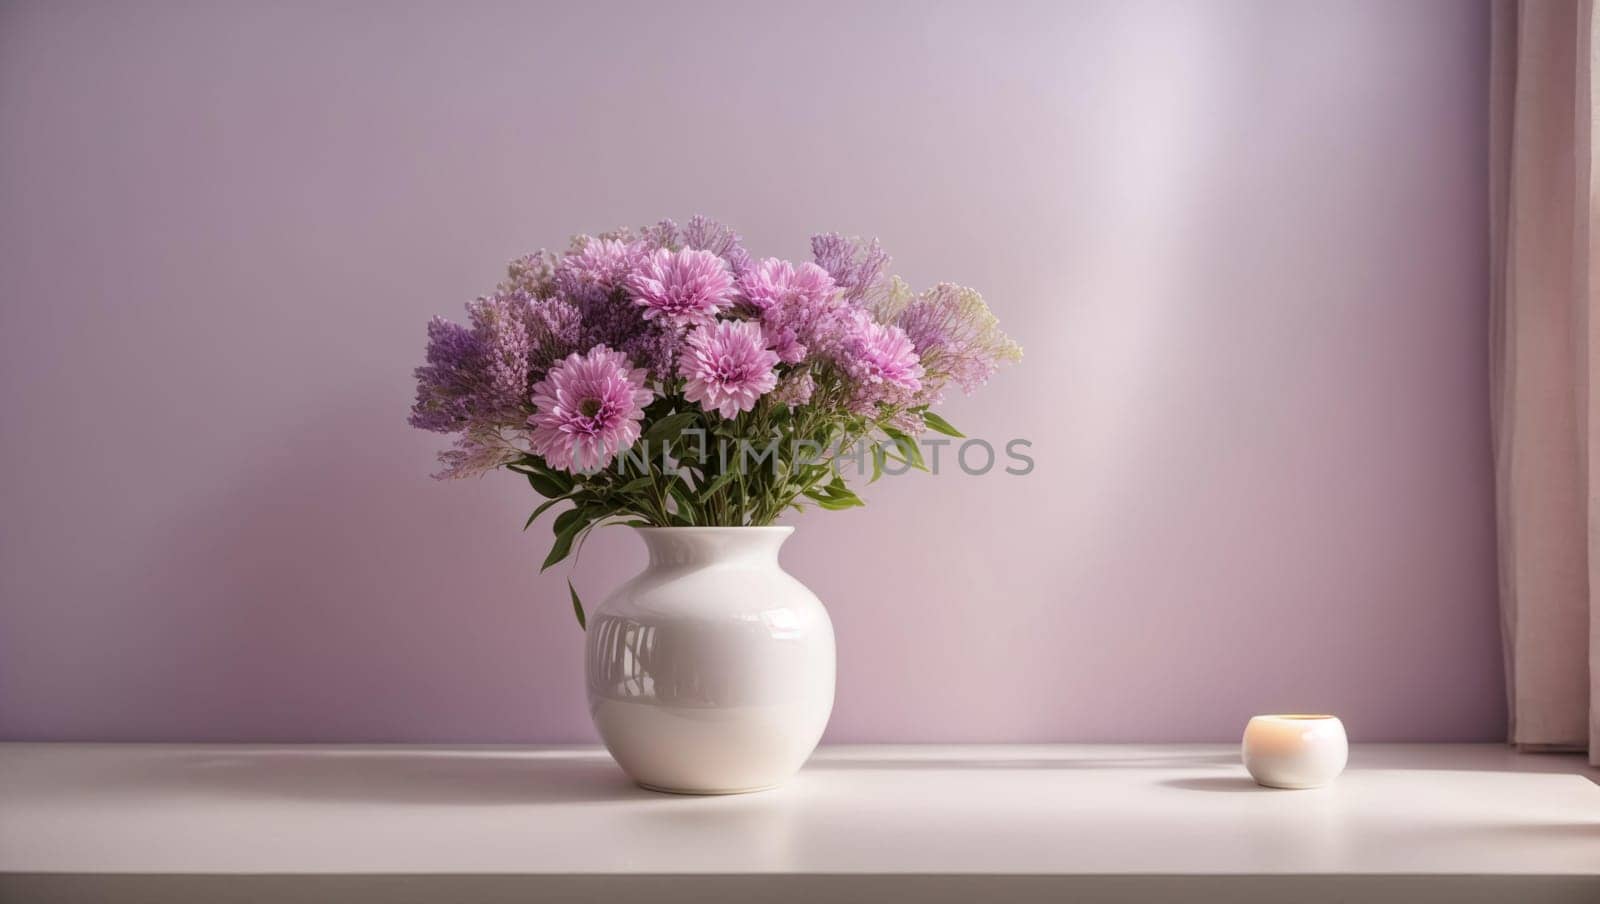 A vase of flowers stands against a light purple wall by Севостьянов